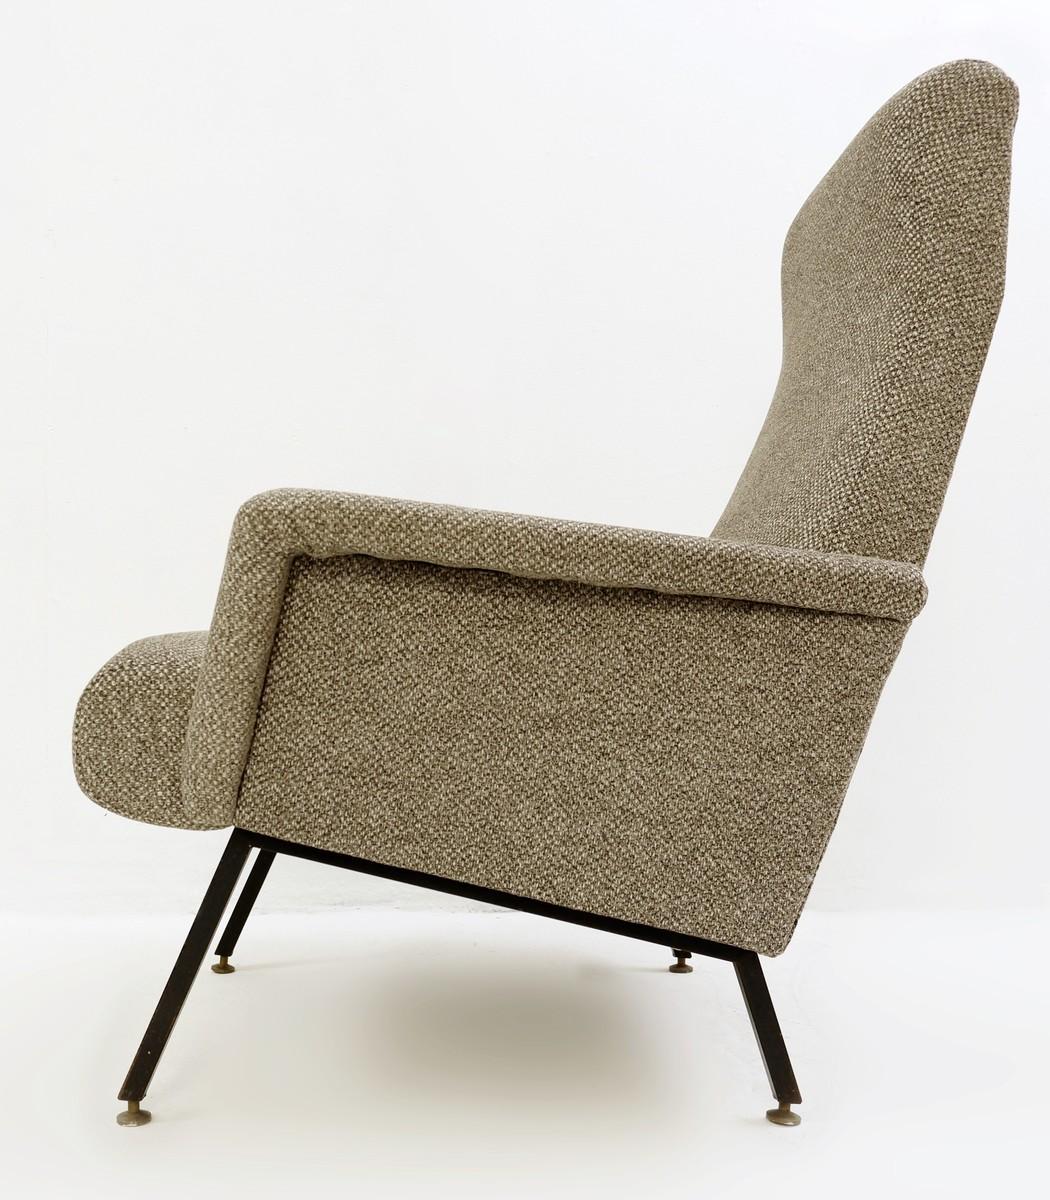 Mid-20th Century Italian Mid-Century Modern  Armchairs with Black Metal Structure from the 1950s